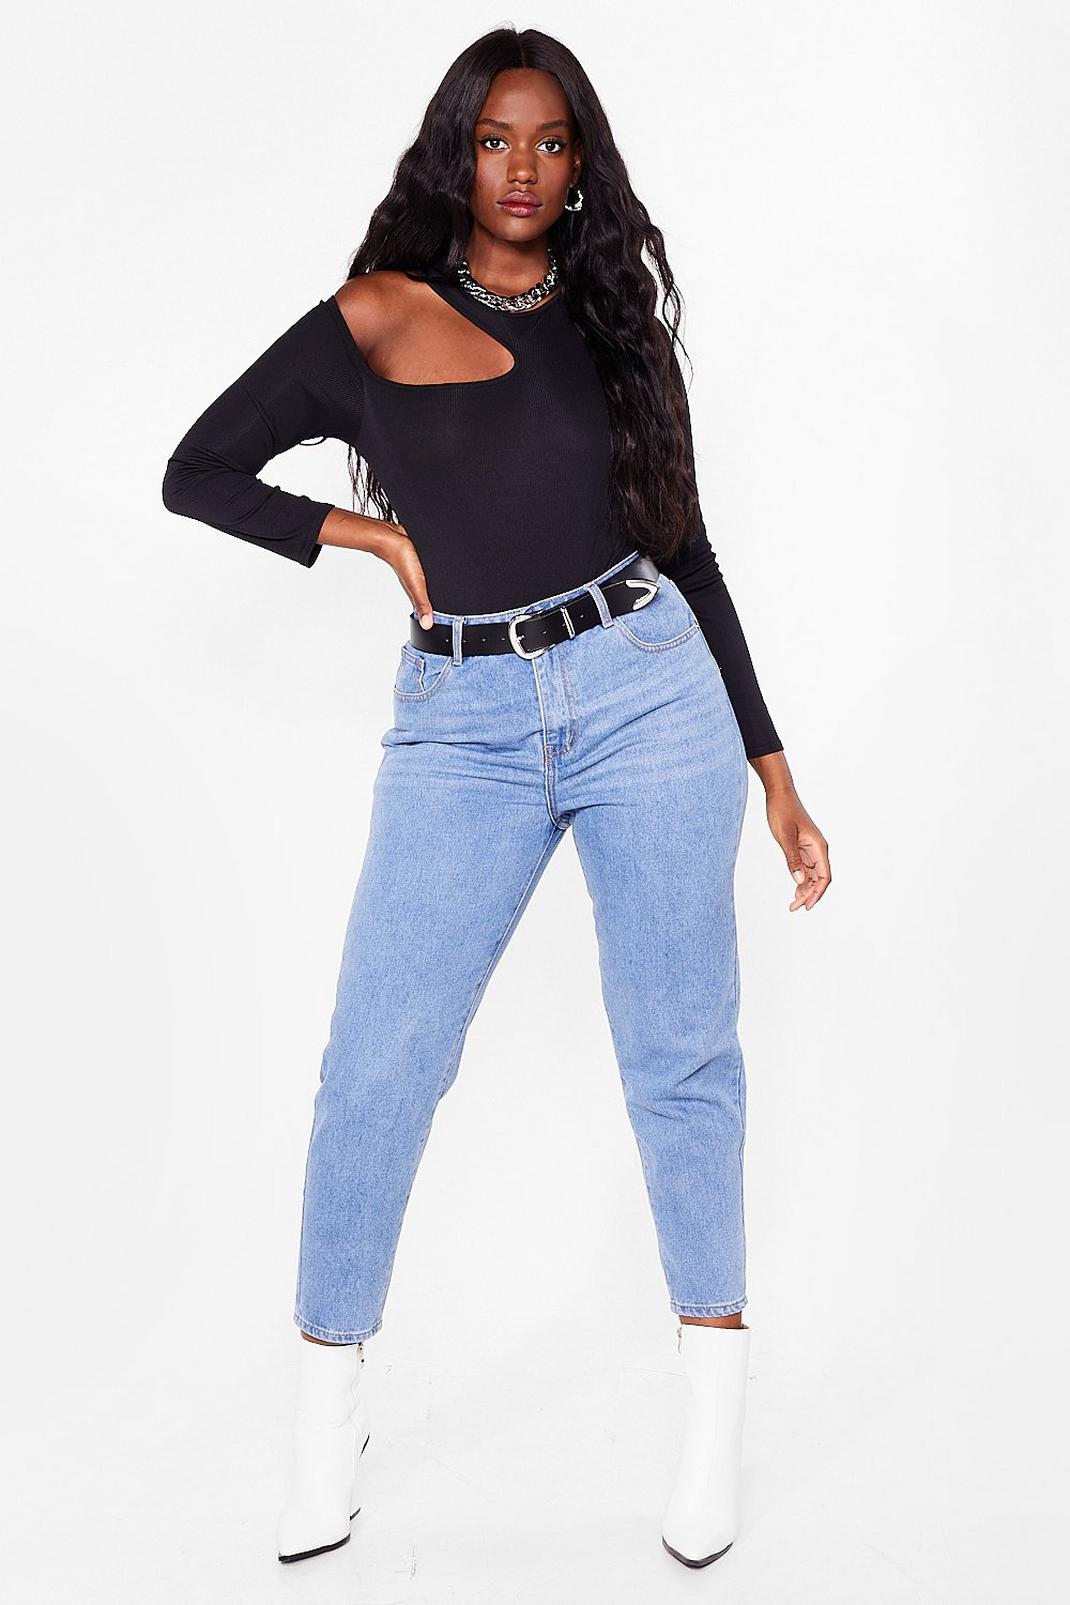 fvwitlyh Mom Jeans High Waisted Women's Plus Size Easy Fit Elastic